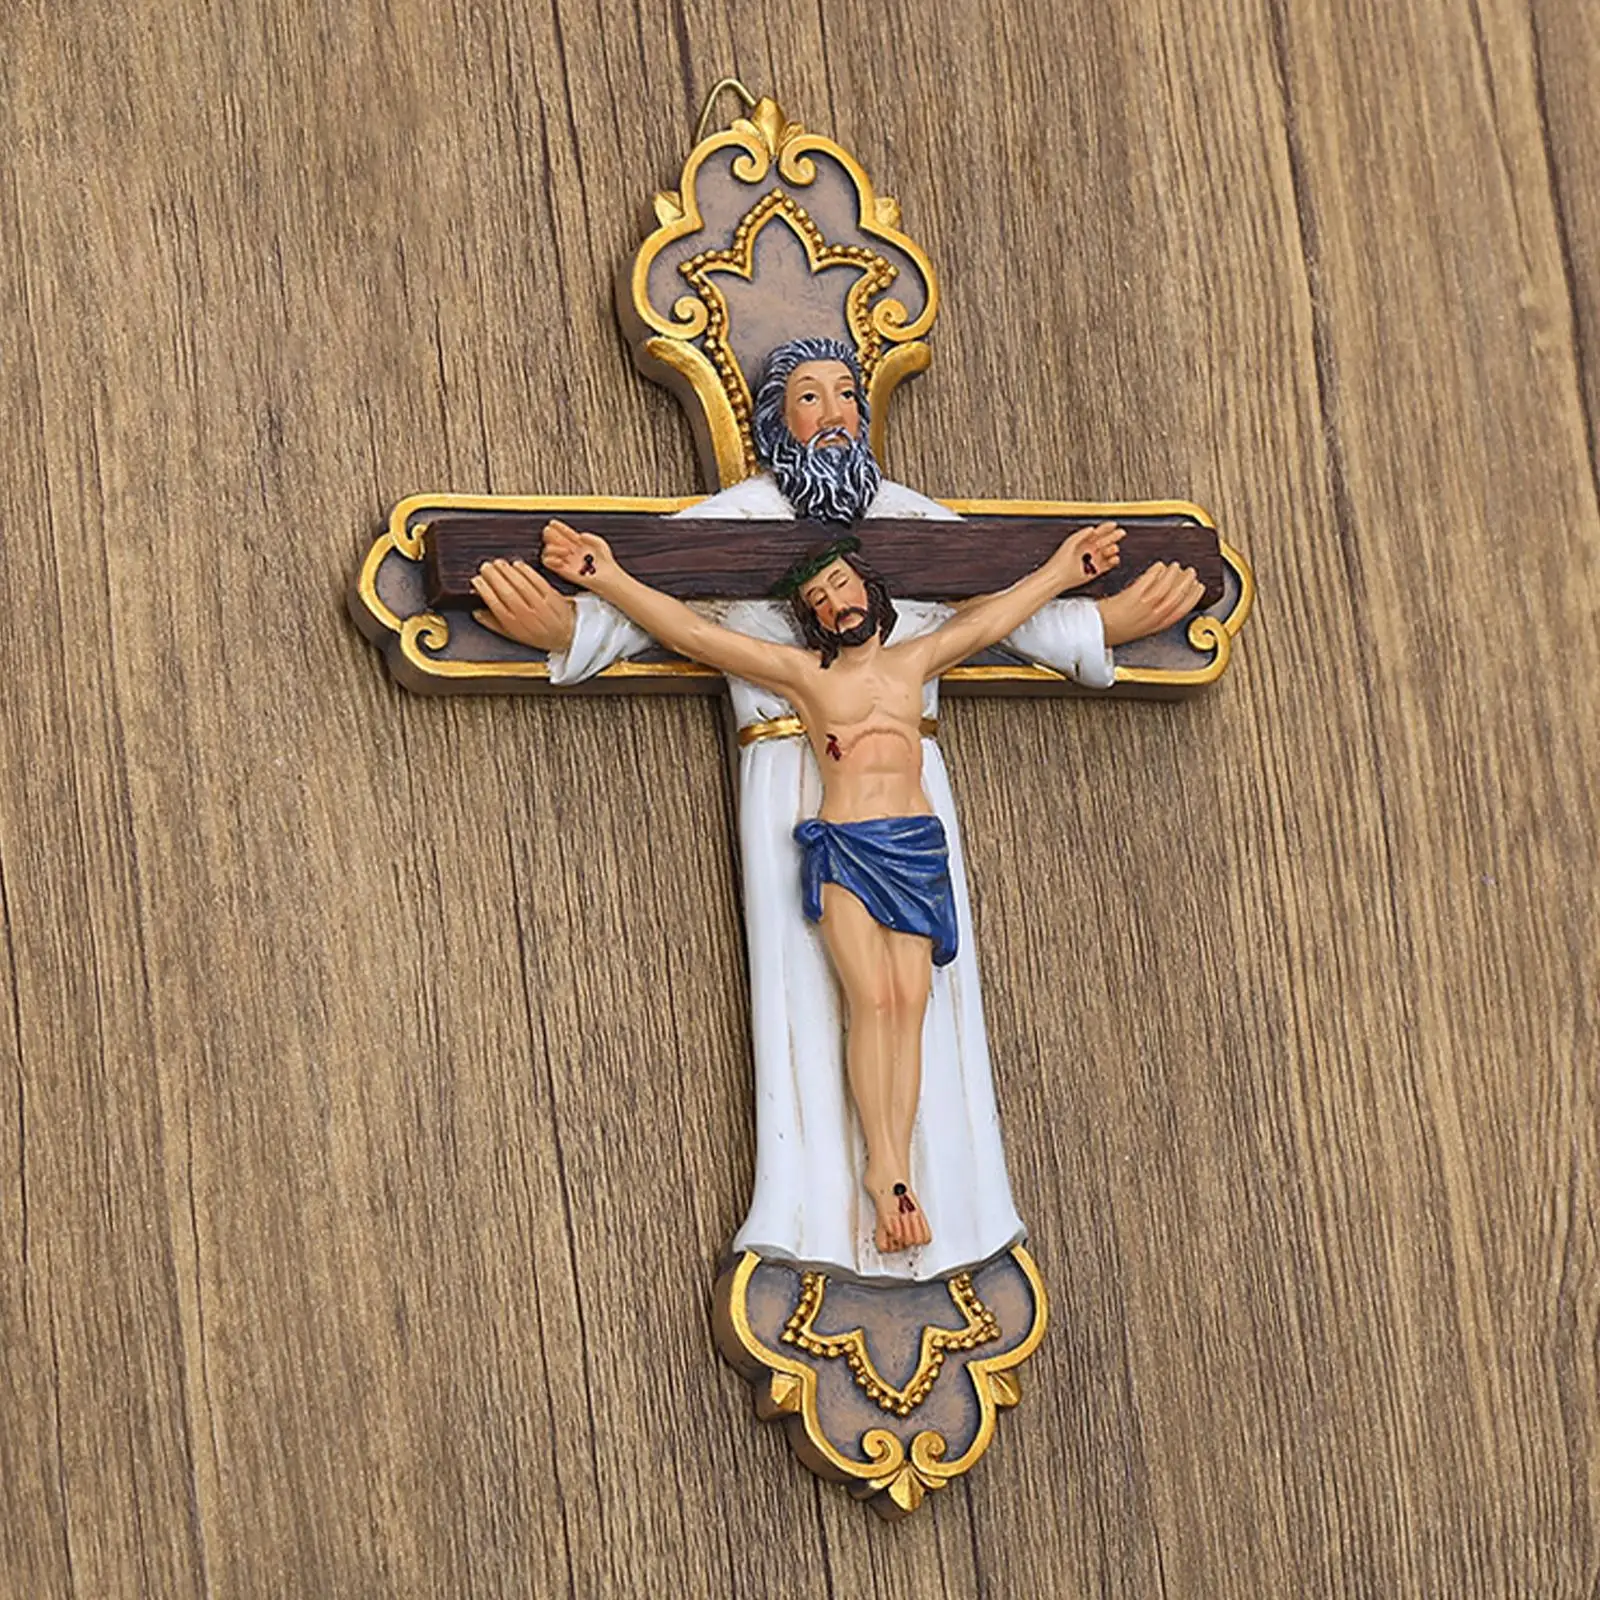 Holy Wall Crucifix Catholic Jesus Cross for Religious Ornament